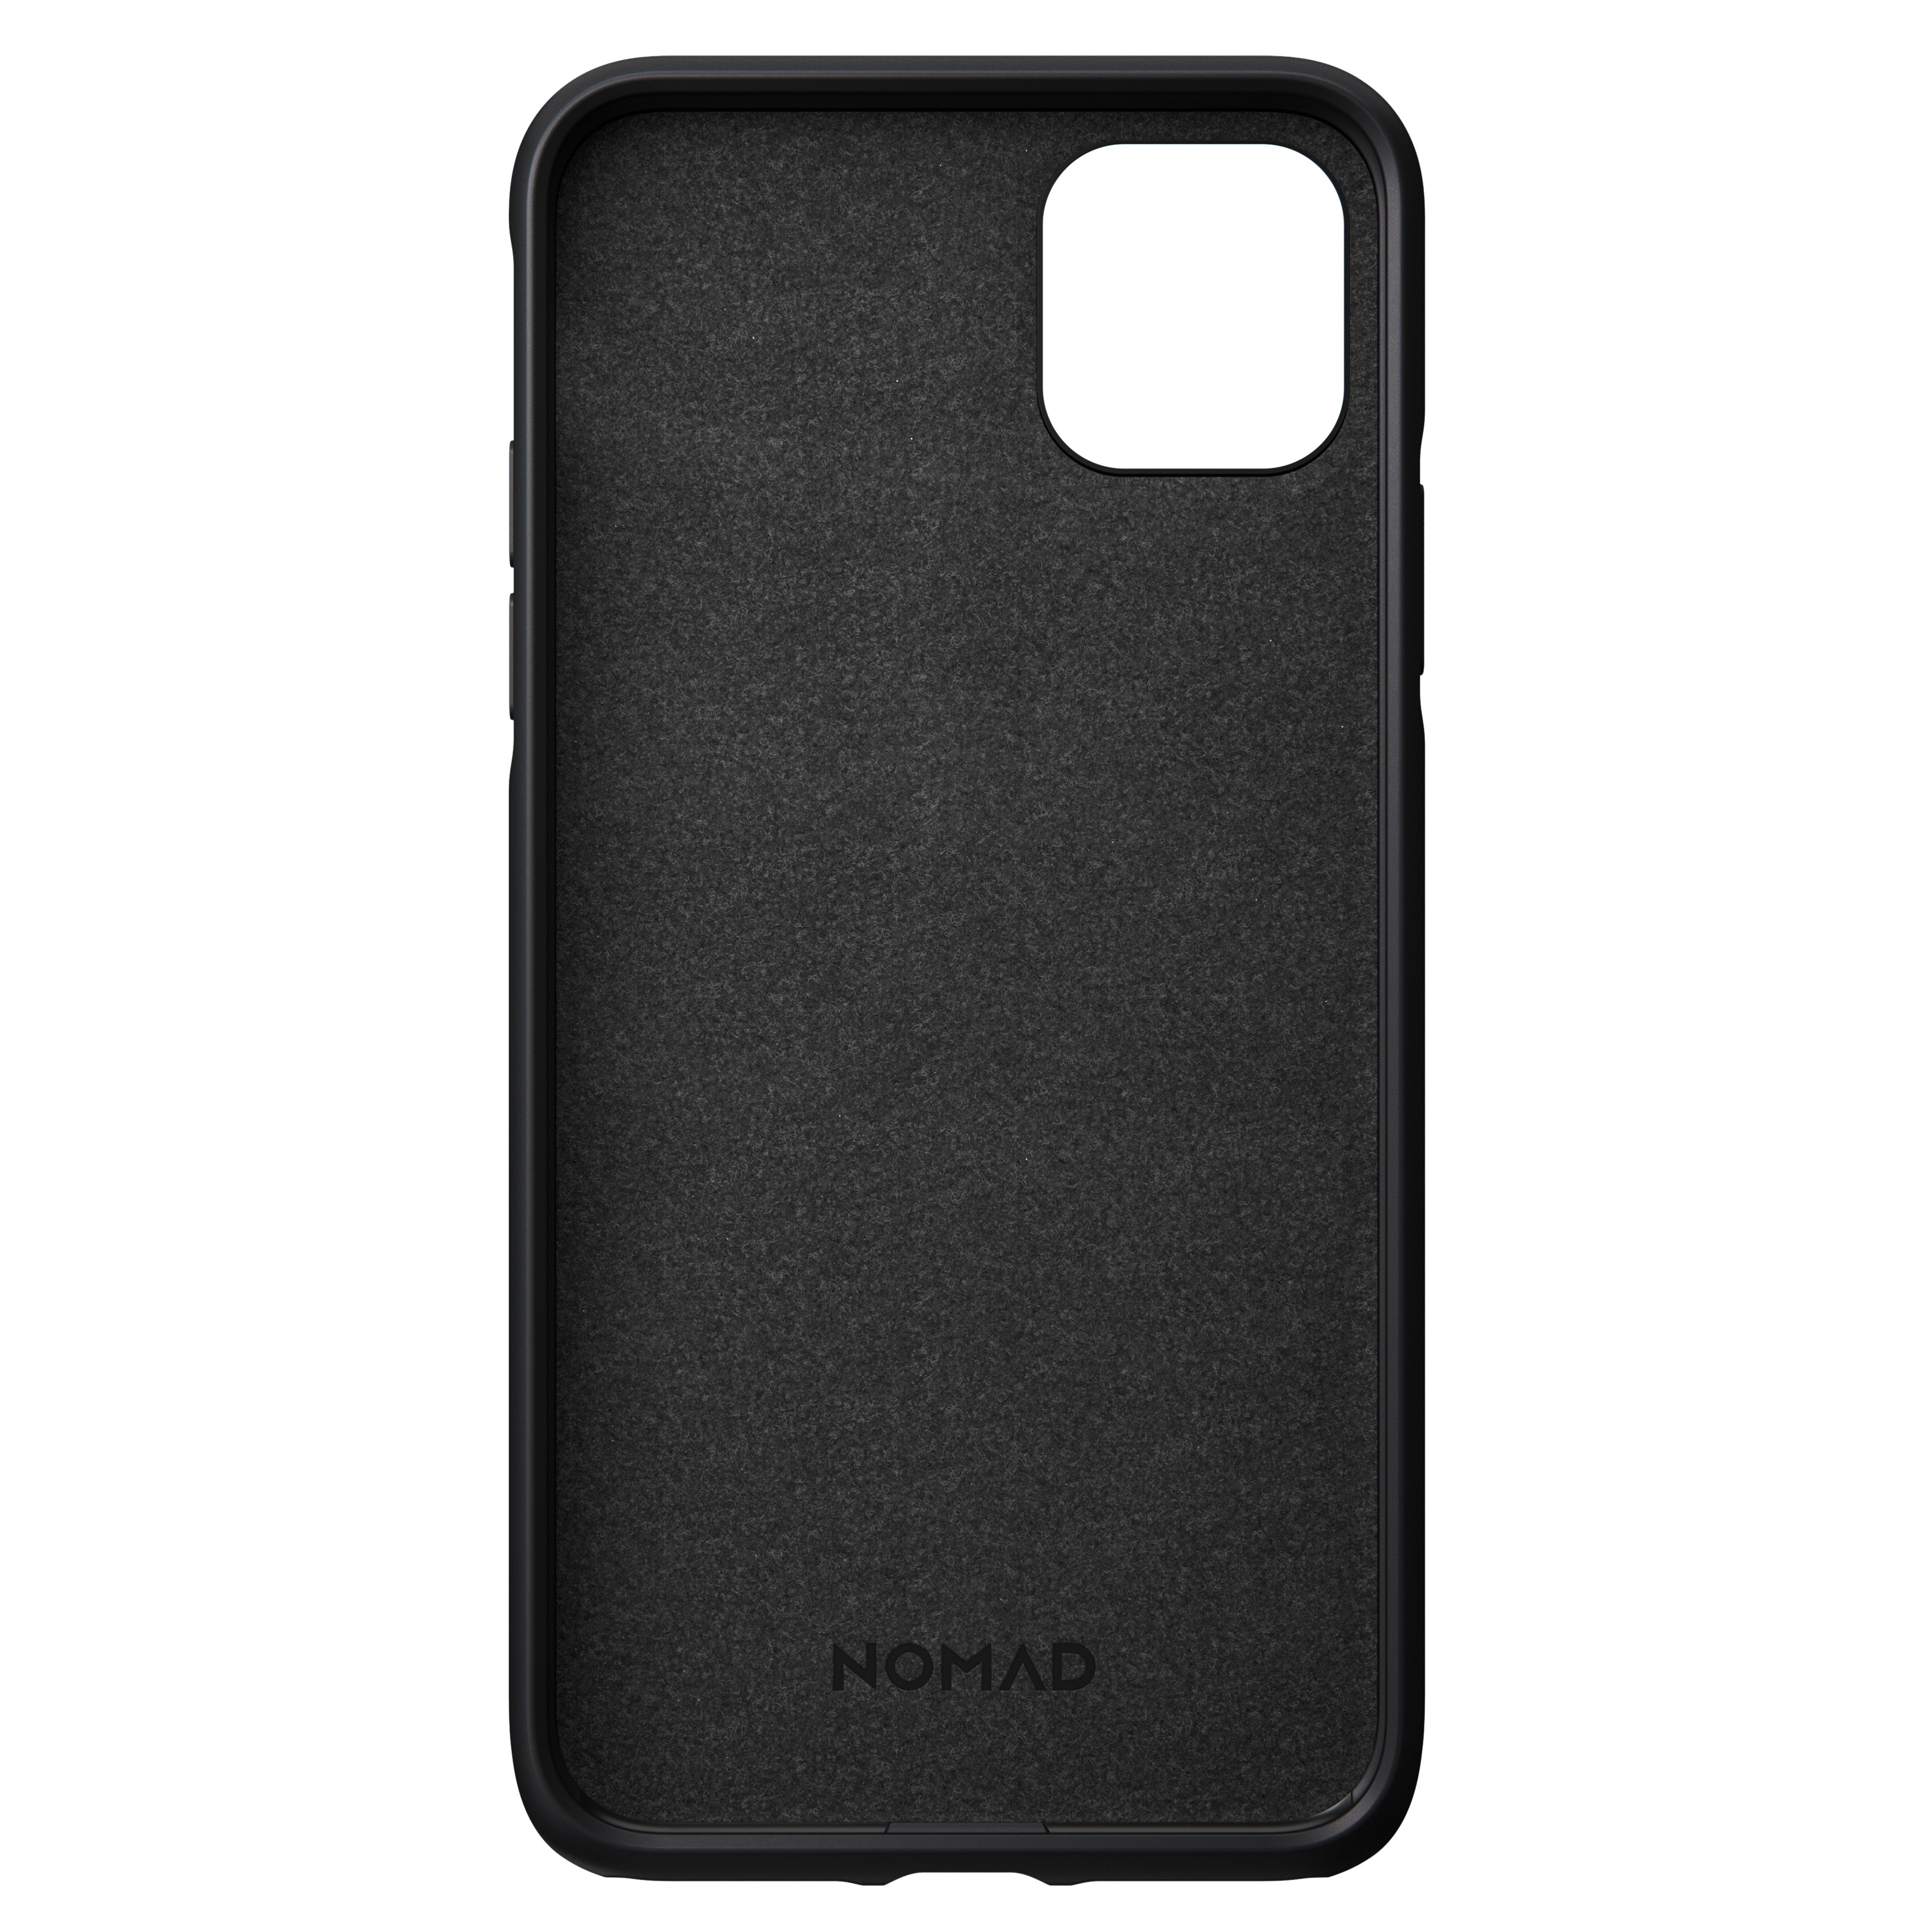 Leather Case Active - iPhone 11 Pro Max - Black